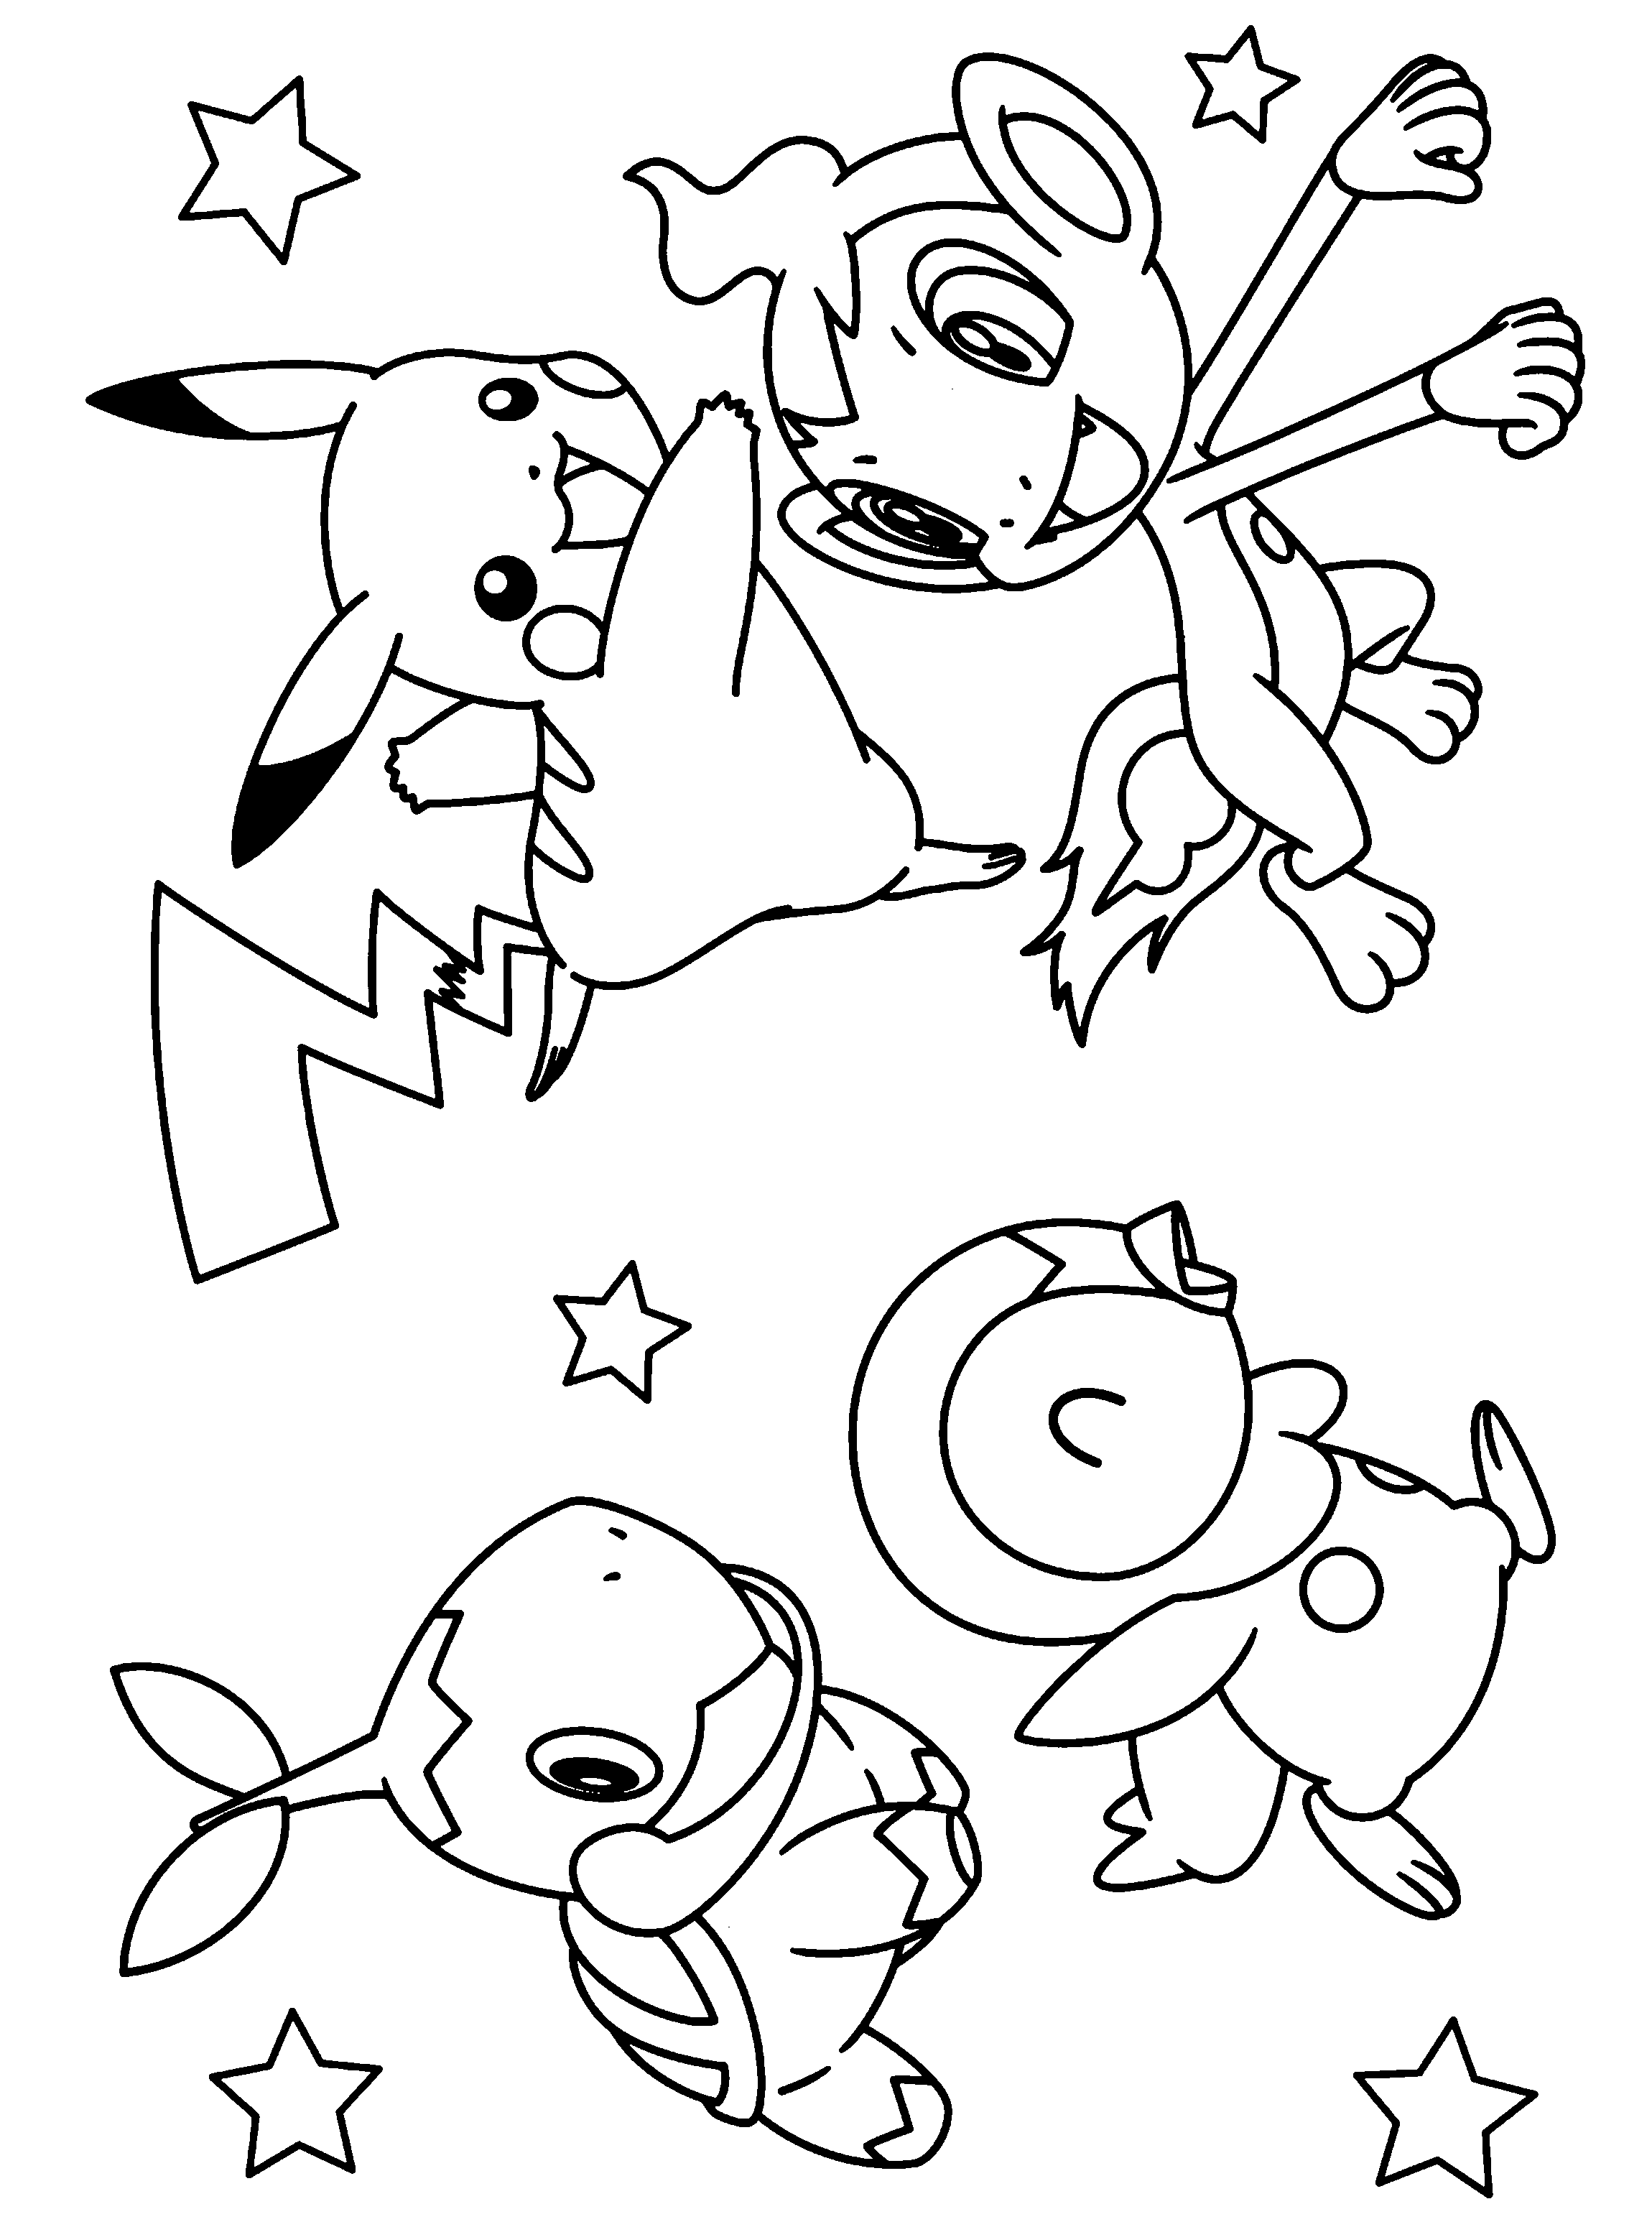 Pokemon 20 Coloring Pages   Coloring Cool